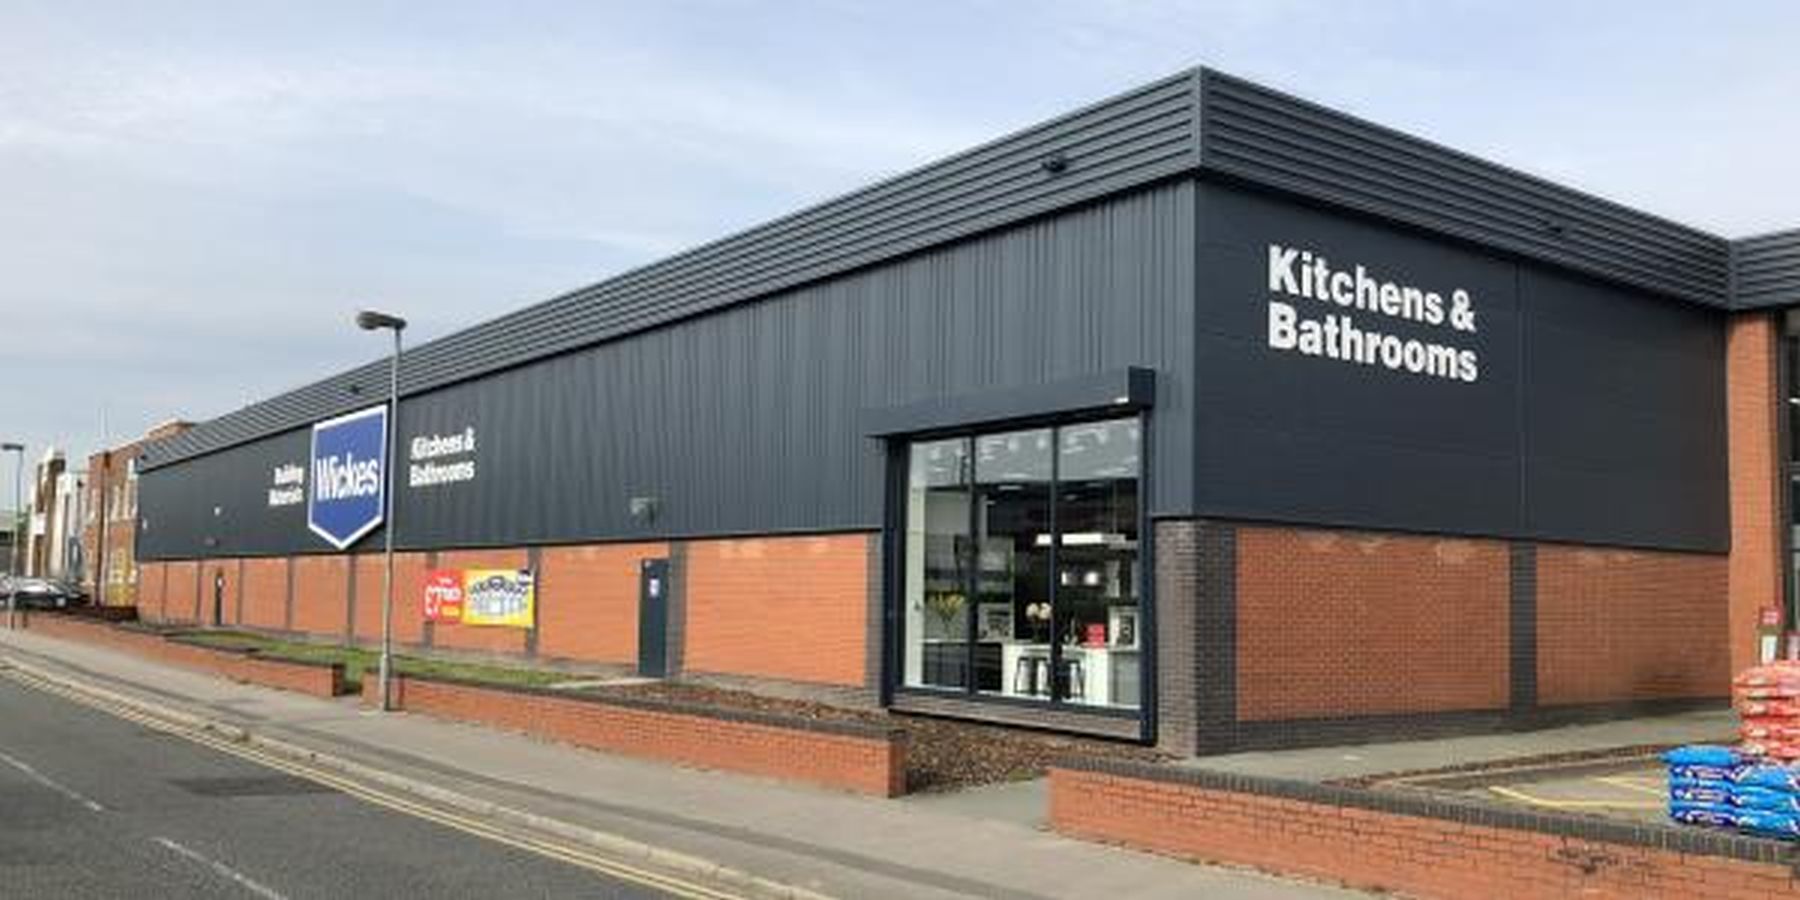 Ryden Manchester advises on the acquisition of a warehouse in Aintree, Liverpool for £5.9m Image